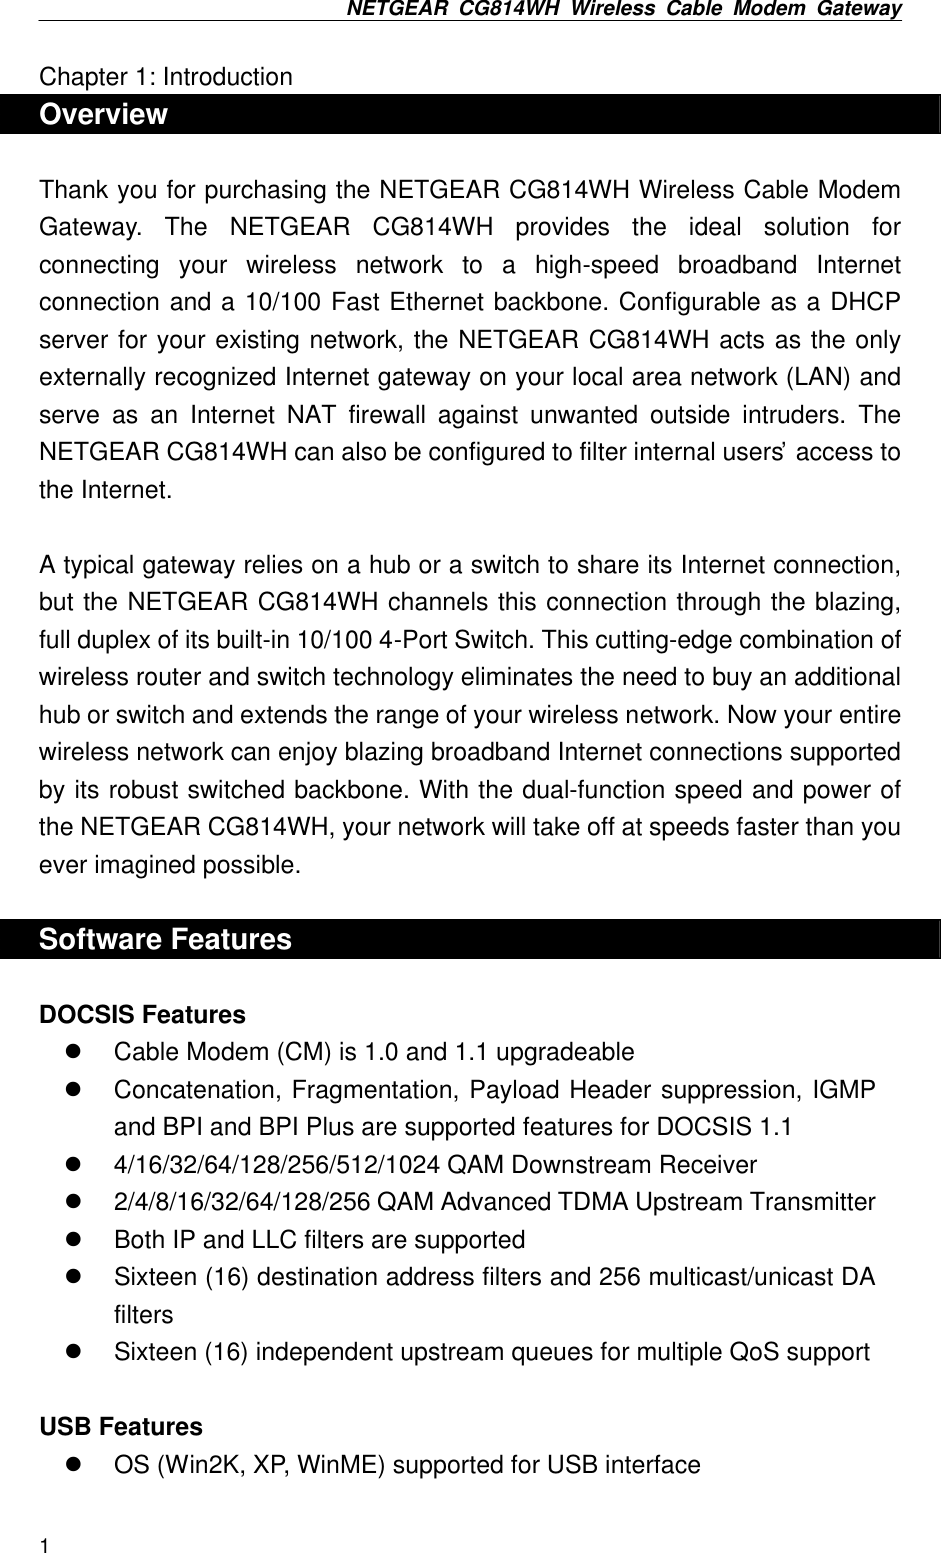 NETGEAR CG814WH Wireless Cable Modem Gateway  1 Chapter 1: Introduction Overview  Thank you for purchasing the NETGEAR CG814WH Wireless Cable Modem Gateway. The NETGEAR CG814WH provides the ideal solution for connecting your wireless network to a high-speed broadband Internet connection and a 10/100 Fast Ethernet backbone. Configurable as a DHCP server for your existing network, the NETGEAR CG814WH acts as the only externally recognized Internet gateway on your local area network (LAN) and serve as an Internet NAT firewall against unwanted outside intruders. The NETGEAR CG814WH can also be configured to filter internal users’ access to the Internet.  A typical gateway relies on a hub or a switch to share its Internet connection, but the NETGEAR CG814WH channels this connection through the blazing, full duplex of its built-in 10/100 4-Port Switch. This cutting-edge combination of wireless router and switch technology eliminates the need to buy an additional hub or switch and extends the range of your wireless network. Now your entire wireless network can enjoy blazing broadband Internet connections supported by its robust switched backbone. With the dual-function speed and power of the NETGEAR CG814WH, your network will take off at speeds faster than you ever imagined possible.  Software Features  DOCSIS Features l Cable Modem (CM) is 1.0 and 1.1 upgradeable l Concatenation, Fragmentation, Payload Header suppression, IGMP and BPI and BPI Plus are supported features for DOCSIS 1.1 l 4/16/32/64/128/256/512/1024 QAM Downstream Receiver   l 2/4/8/16/32/64/128/256 QAM Advanced TDMA Upstream Transmitter l Both IP and LLC filters are supported l Sixteen (16) destination address filters and 256 multicast/unicast DA filters l Sixteen (16) independent upstream queues for multiple QoS support  USB Features l OS (Win2K, XP, WinME) supported for USB interface 